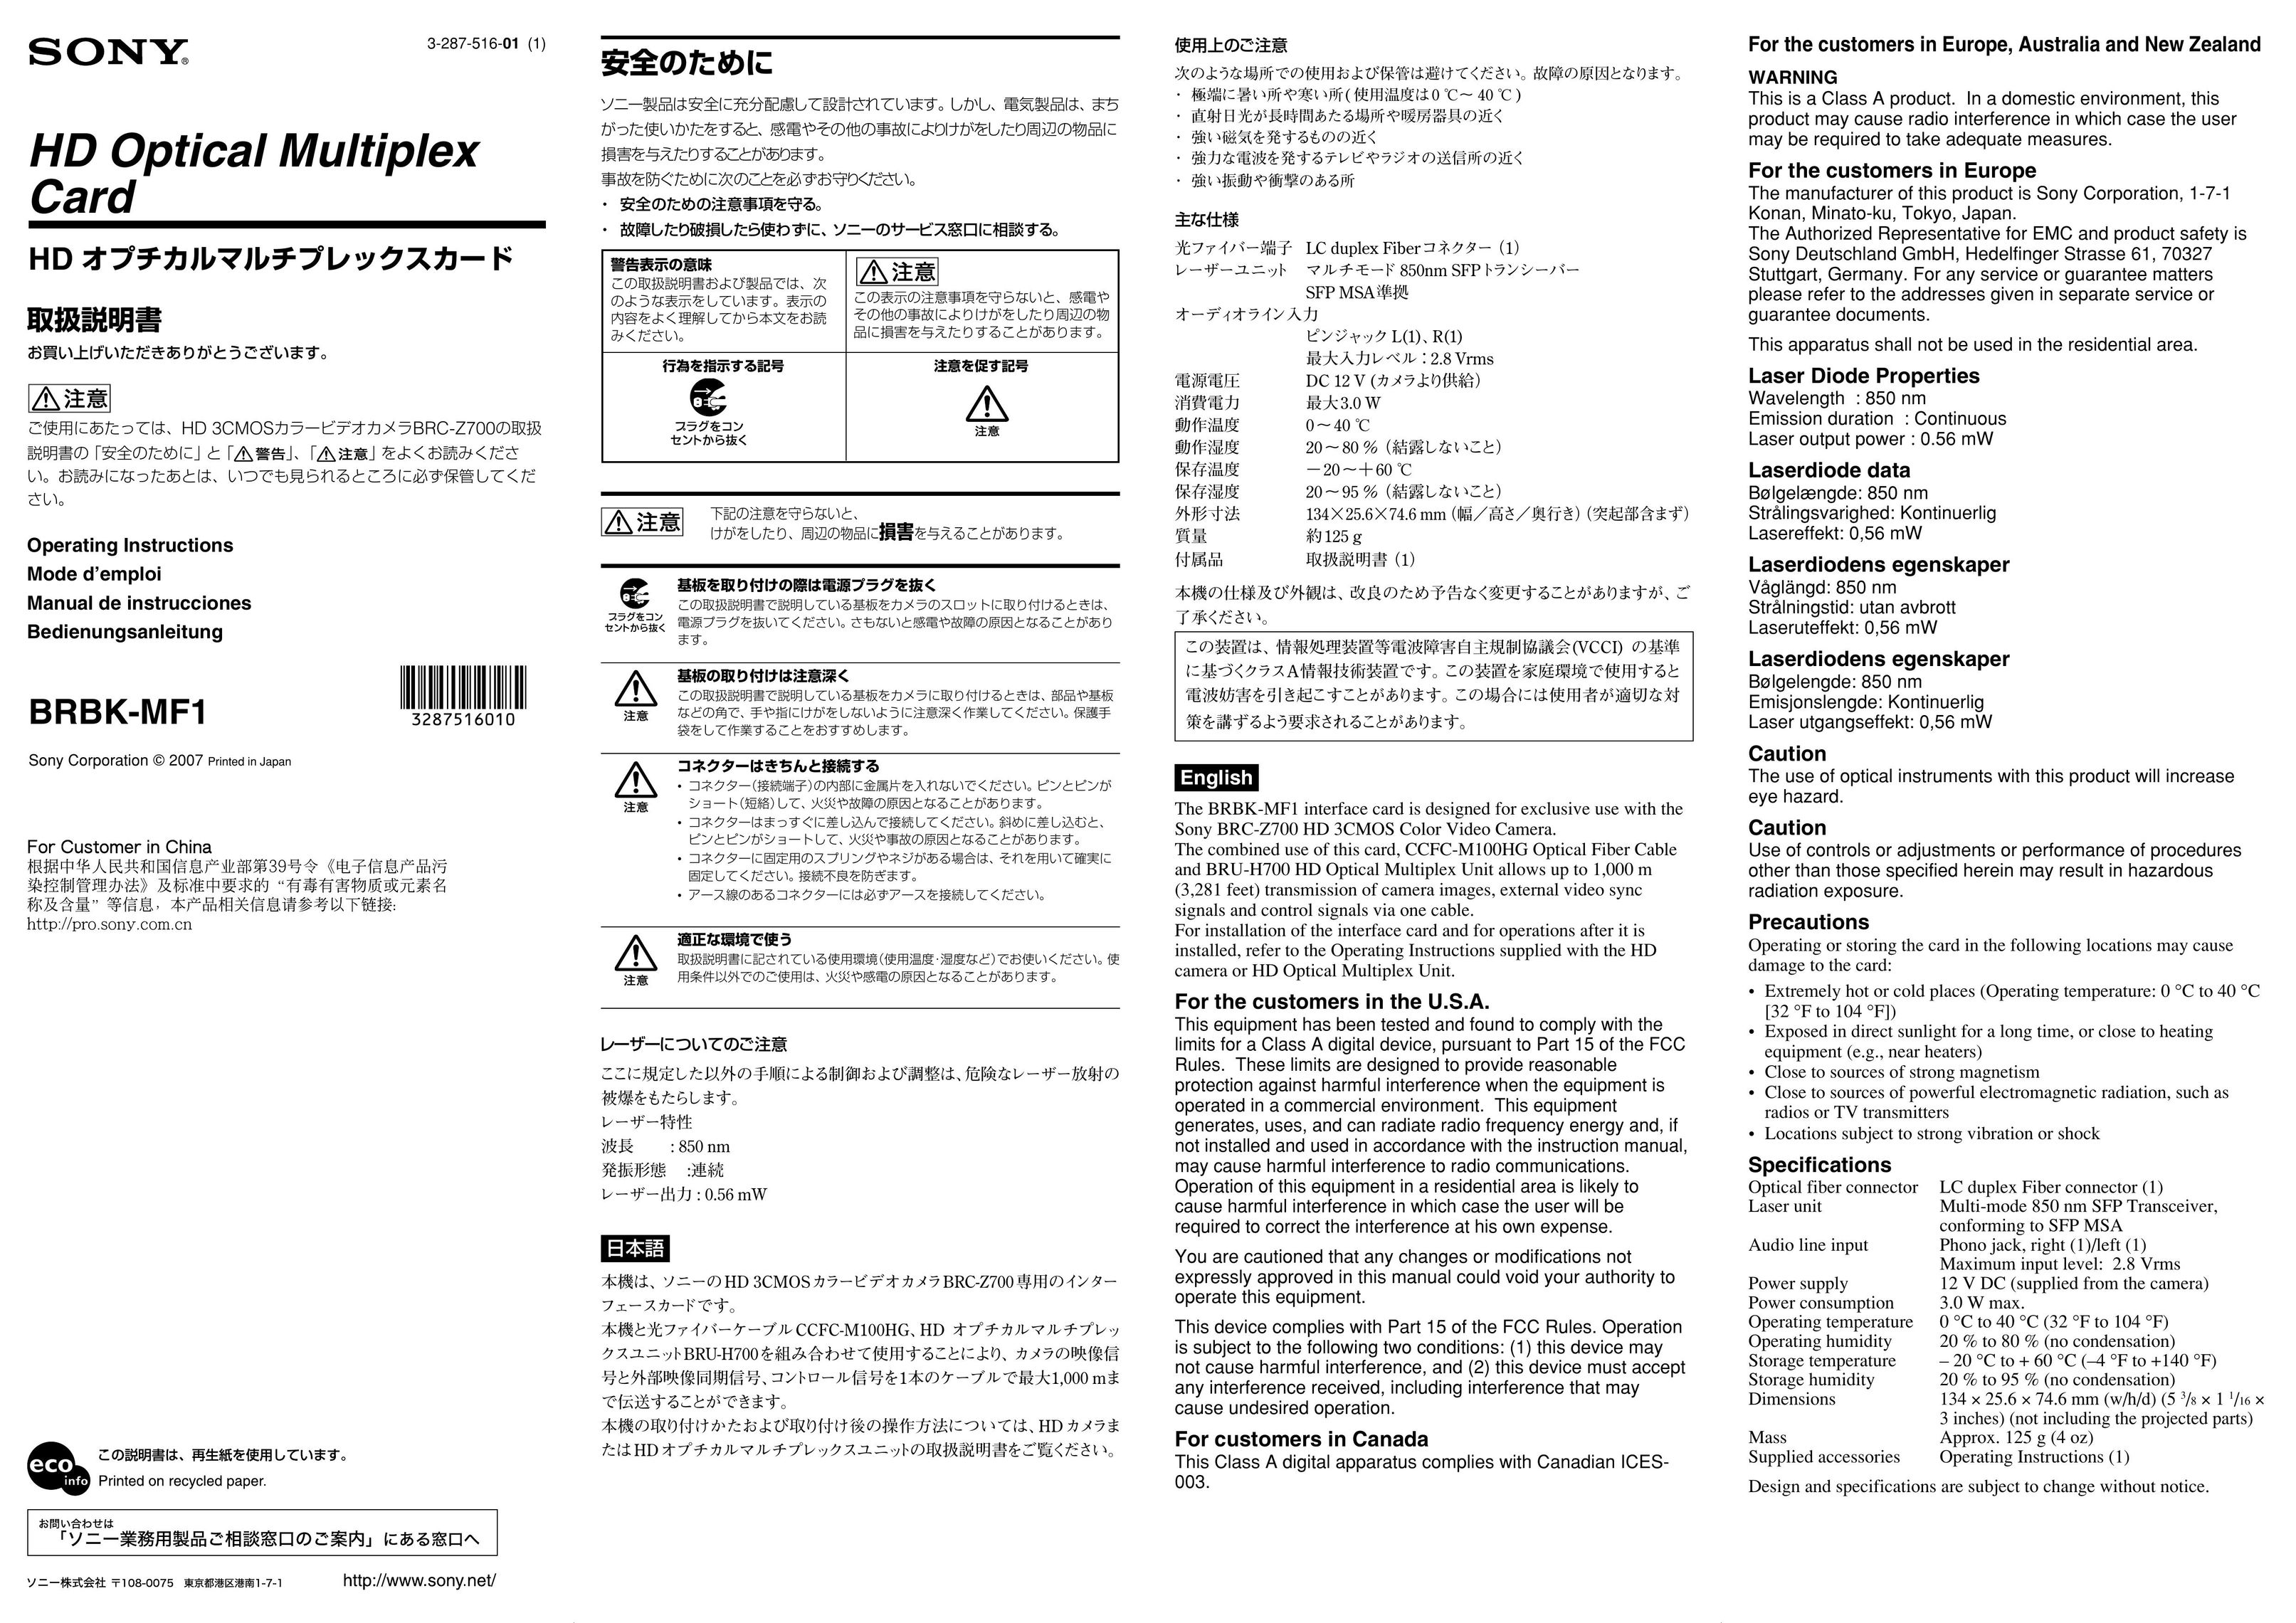 Sony BR8K-MF1 TV Cables User Manual